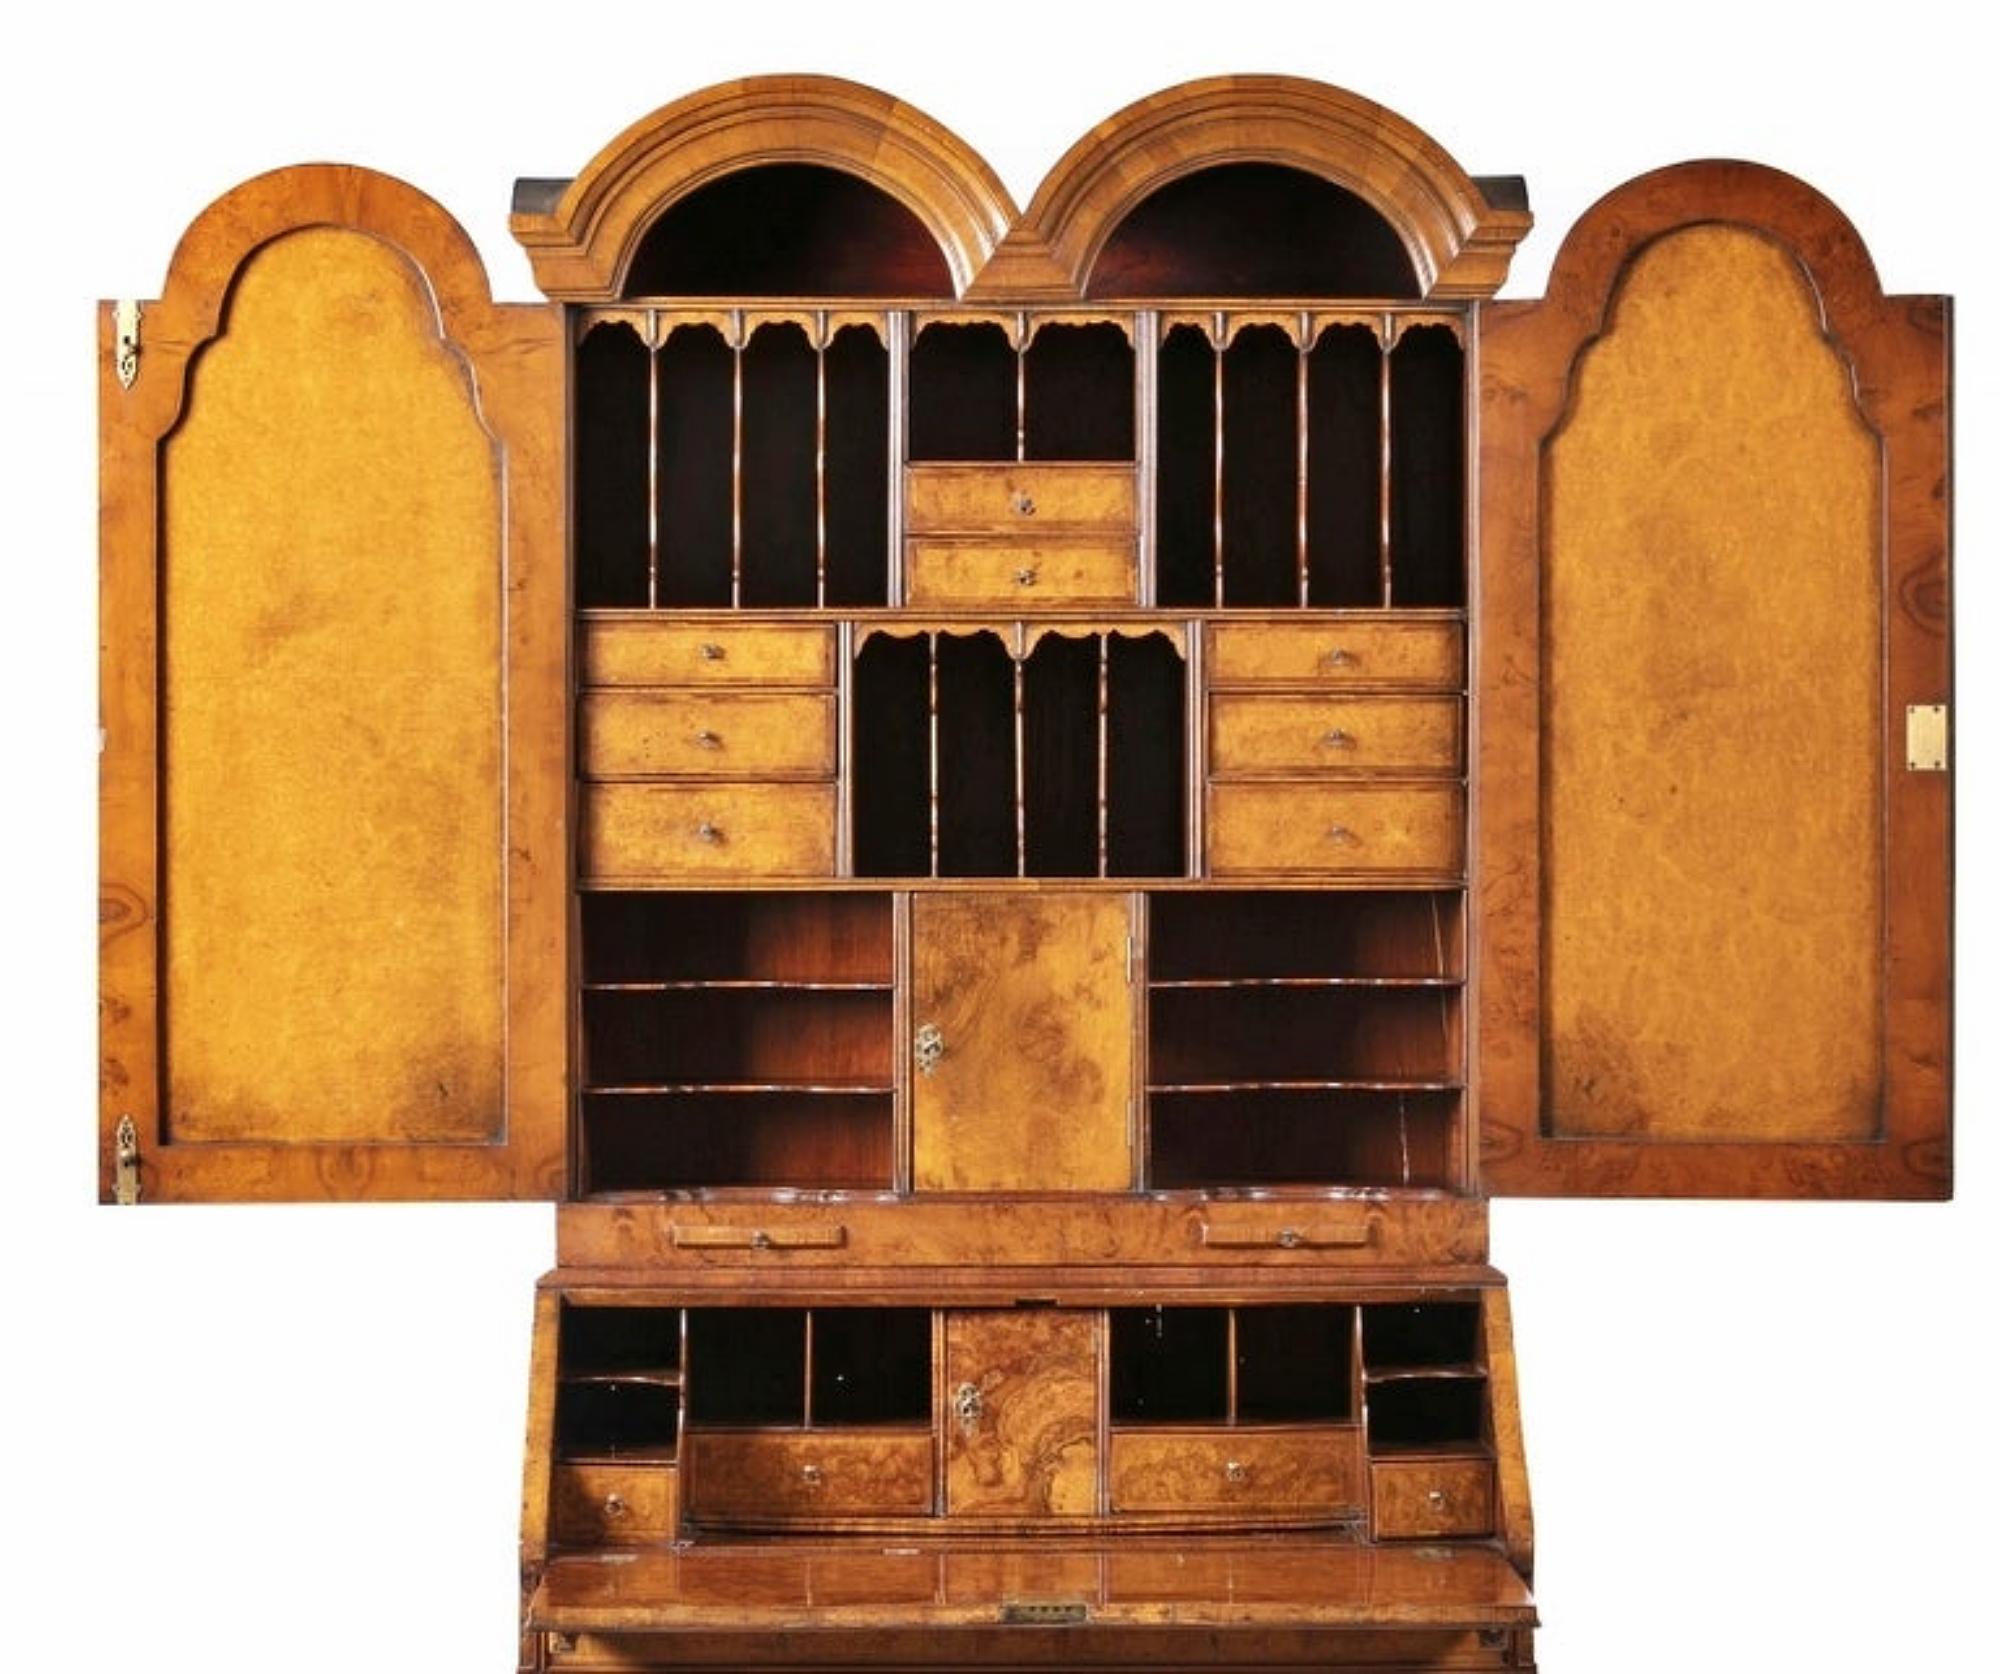 George I cabinet with elevation
English, in mahogany and partridge's eye
18th Century.
Top with two interior doors with drawers, door and bins.
Bottom with two drawers and two big drawers.
Folding top with drawers and bins.
Signs of